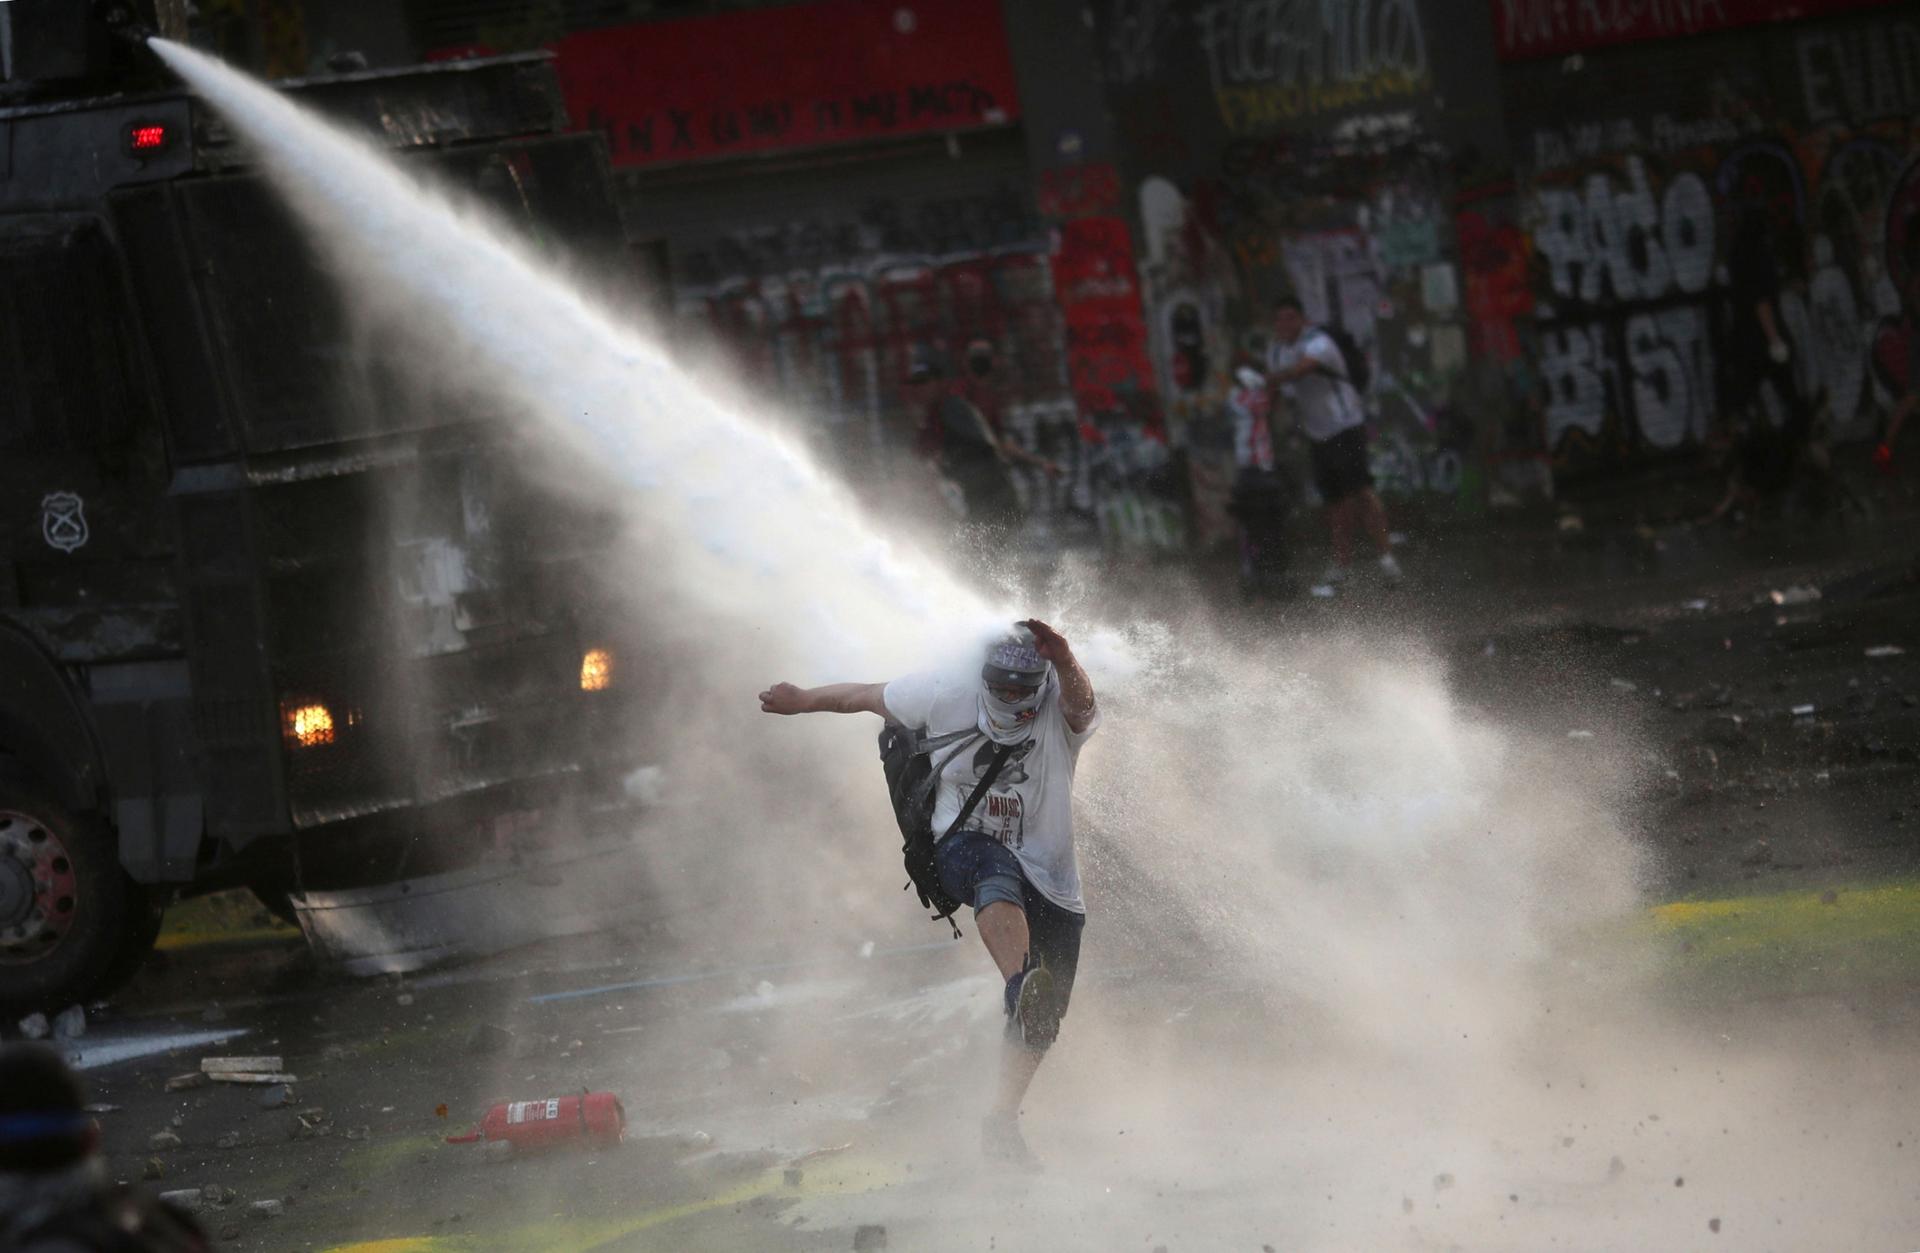 A person is shown being sprayed by a water cannon from above.